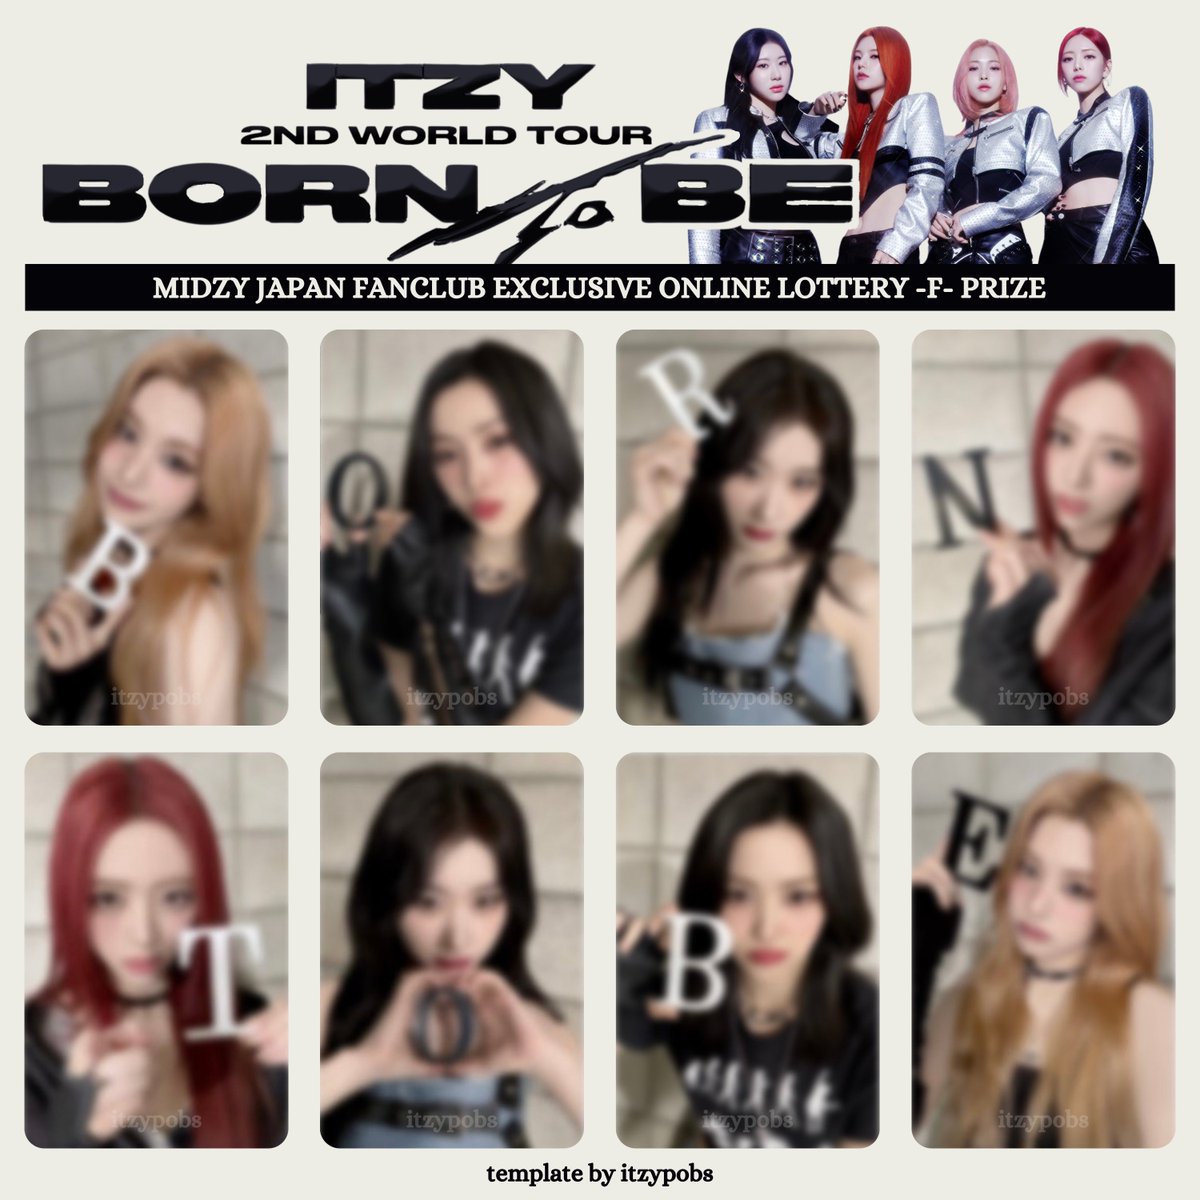 ❤️‍🔥 ITZY BORN TO BE WORLD TOUR IN JAPAN midzy jpn fanclub online lottery F prize photocard / くじ F賞 / 있지 포카 template
∟ download itzypobs.carrd.co

will update fc pcs when previews are out~ 

🏷️: #ITZY #ITZY_BORNTOBE #ITZY_JAPAN #itzypobs_templates